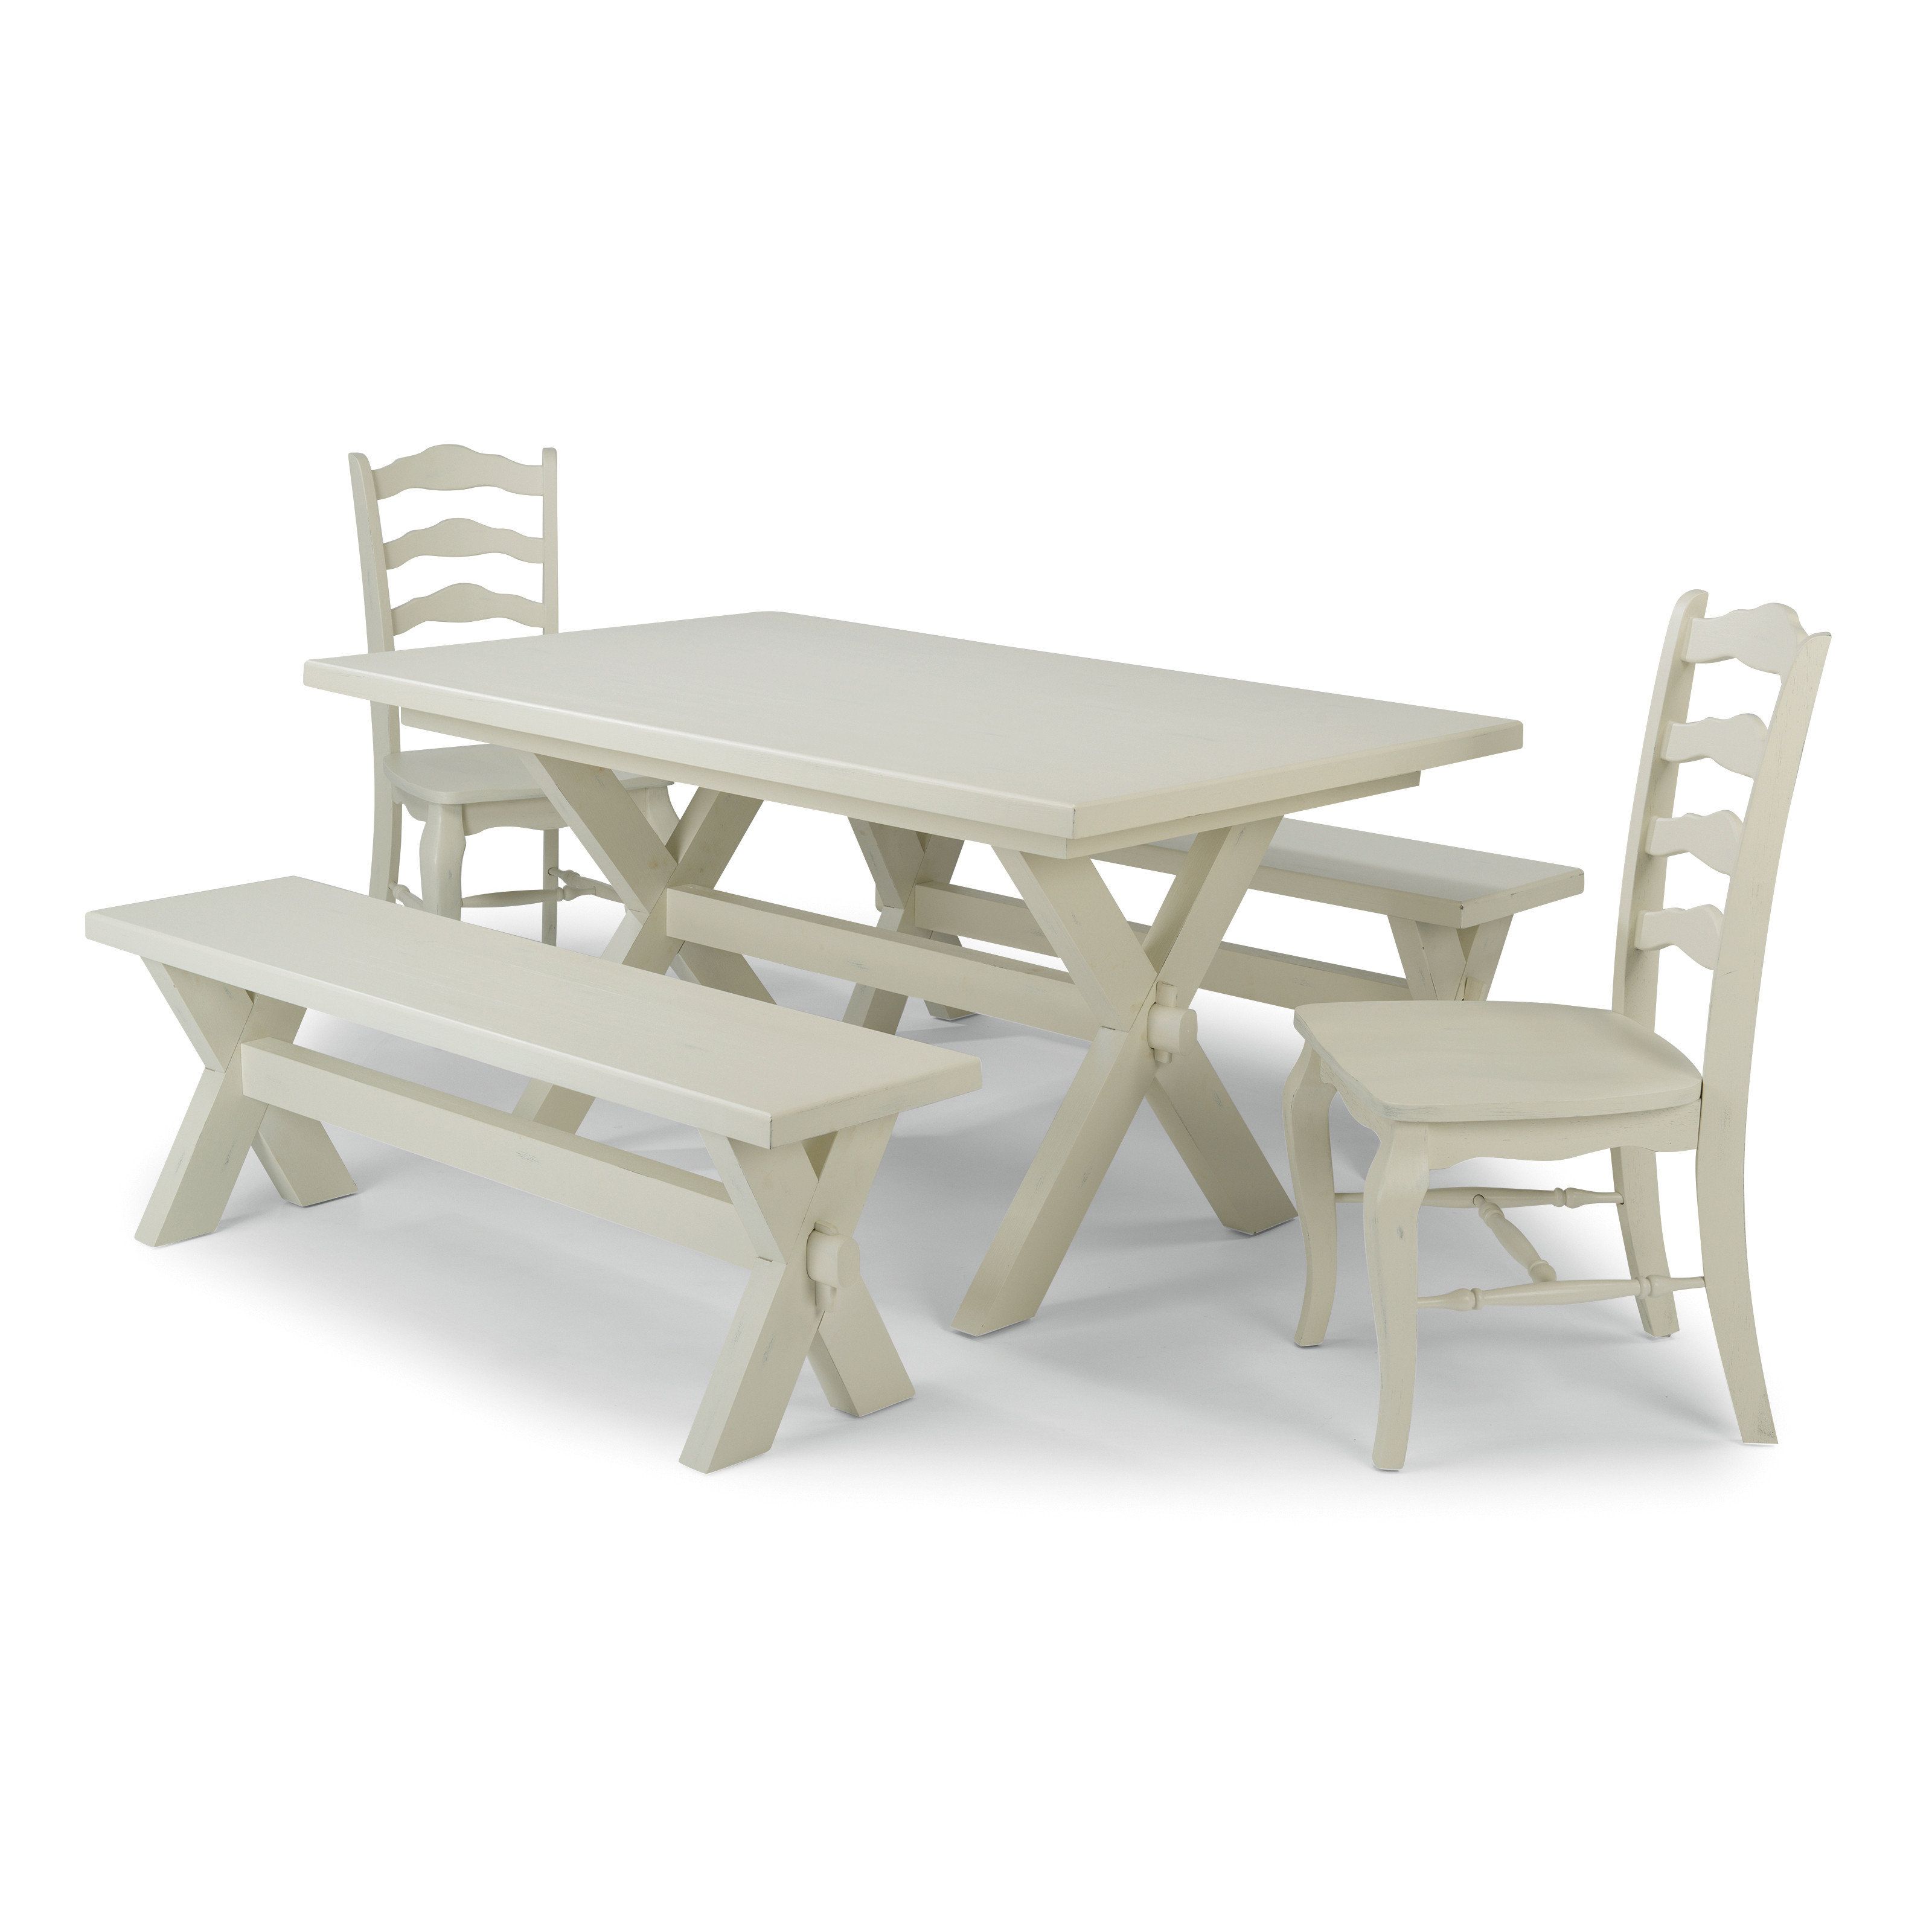 Moravia 5 Piece Dining Set For Well Known Kieffer 5 Piece Dining Sets (View 19 of 20)